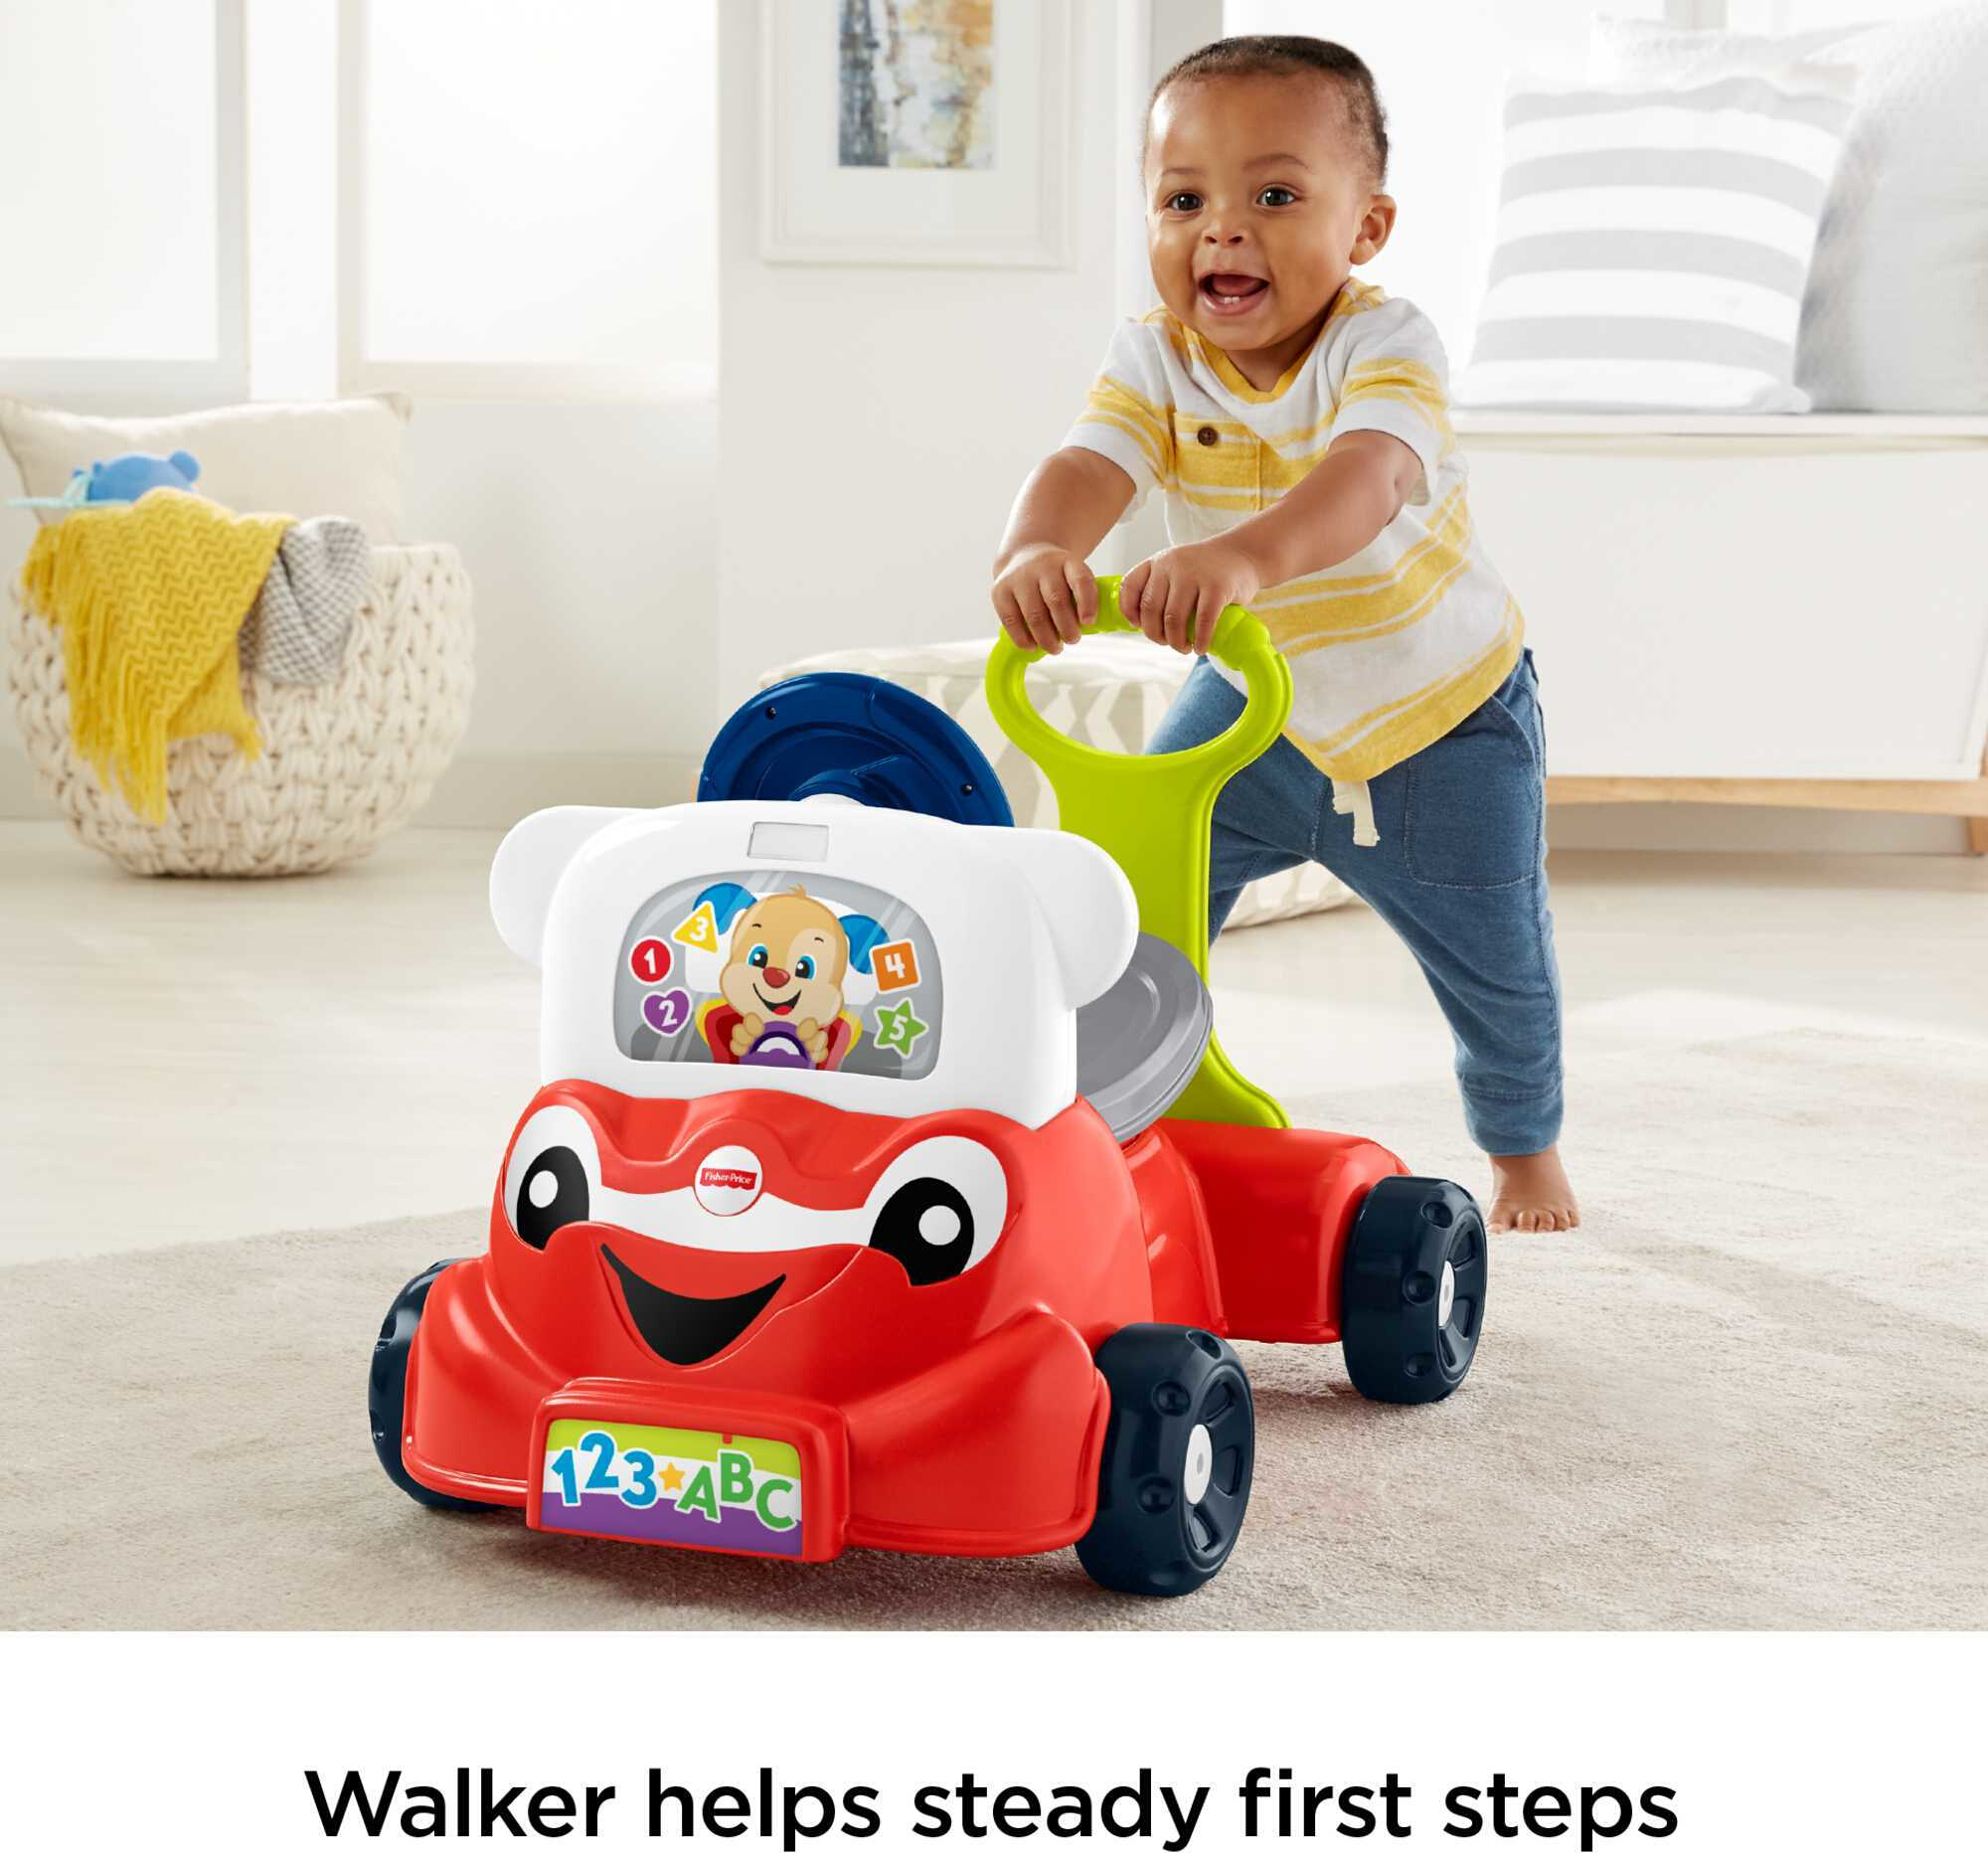 Fisher-Price Laugh & Learn 3-in-1 Smart Car Interactive Infant Walker & Toddler Ride-On Toy - image 5 of 9